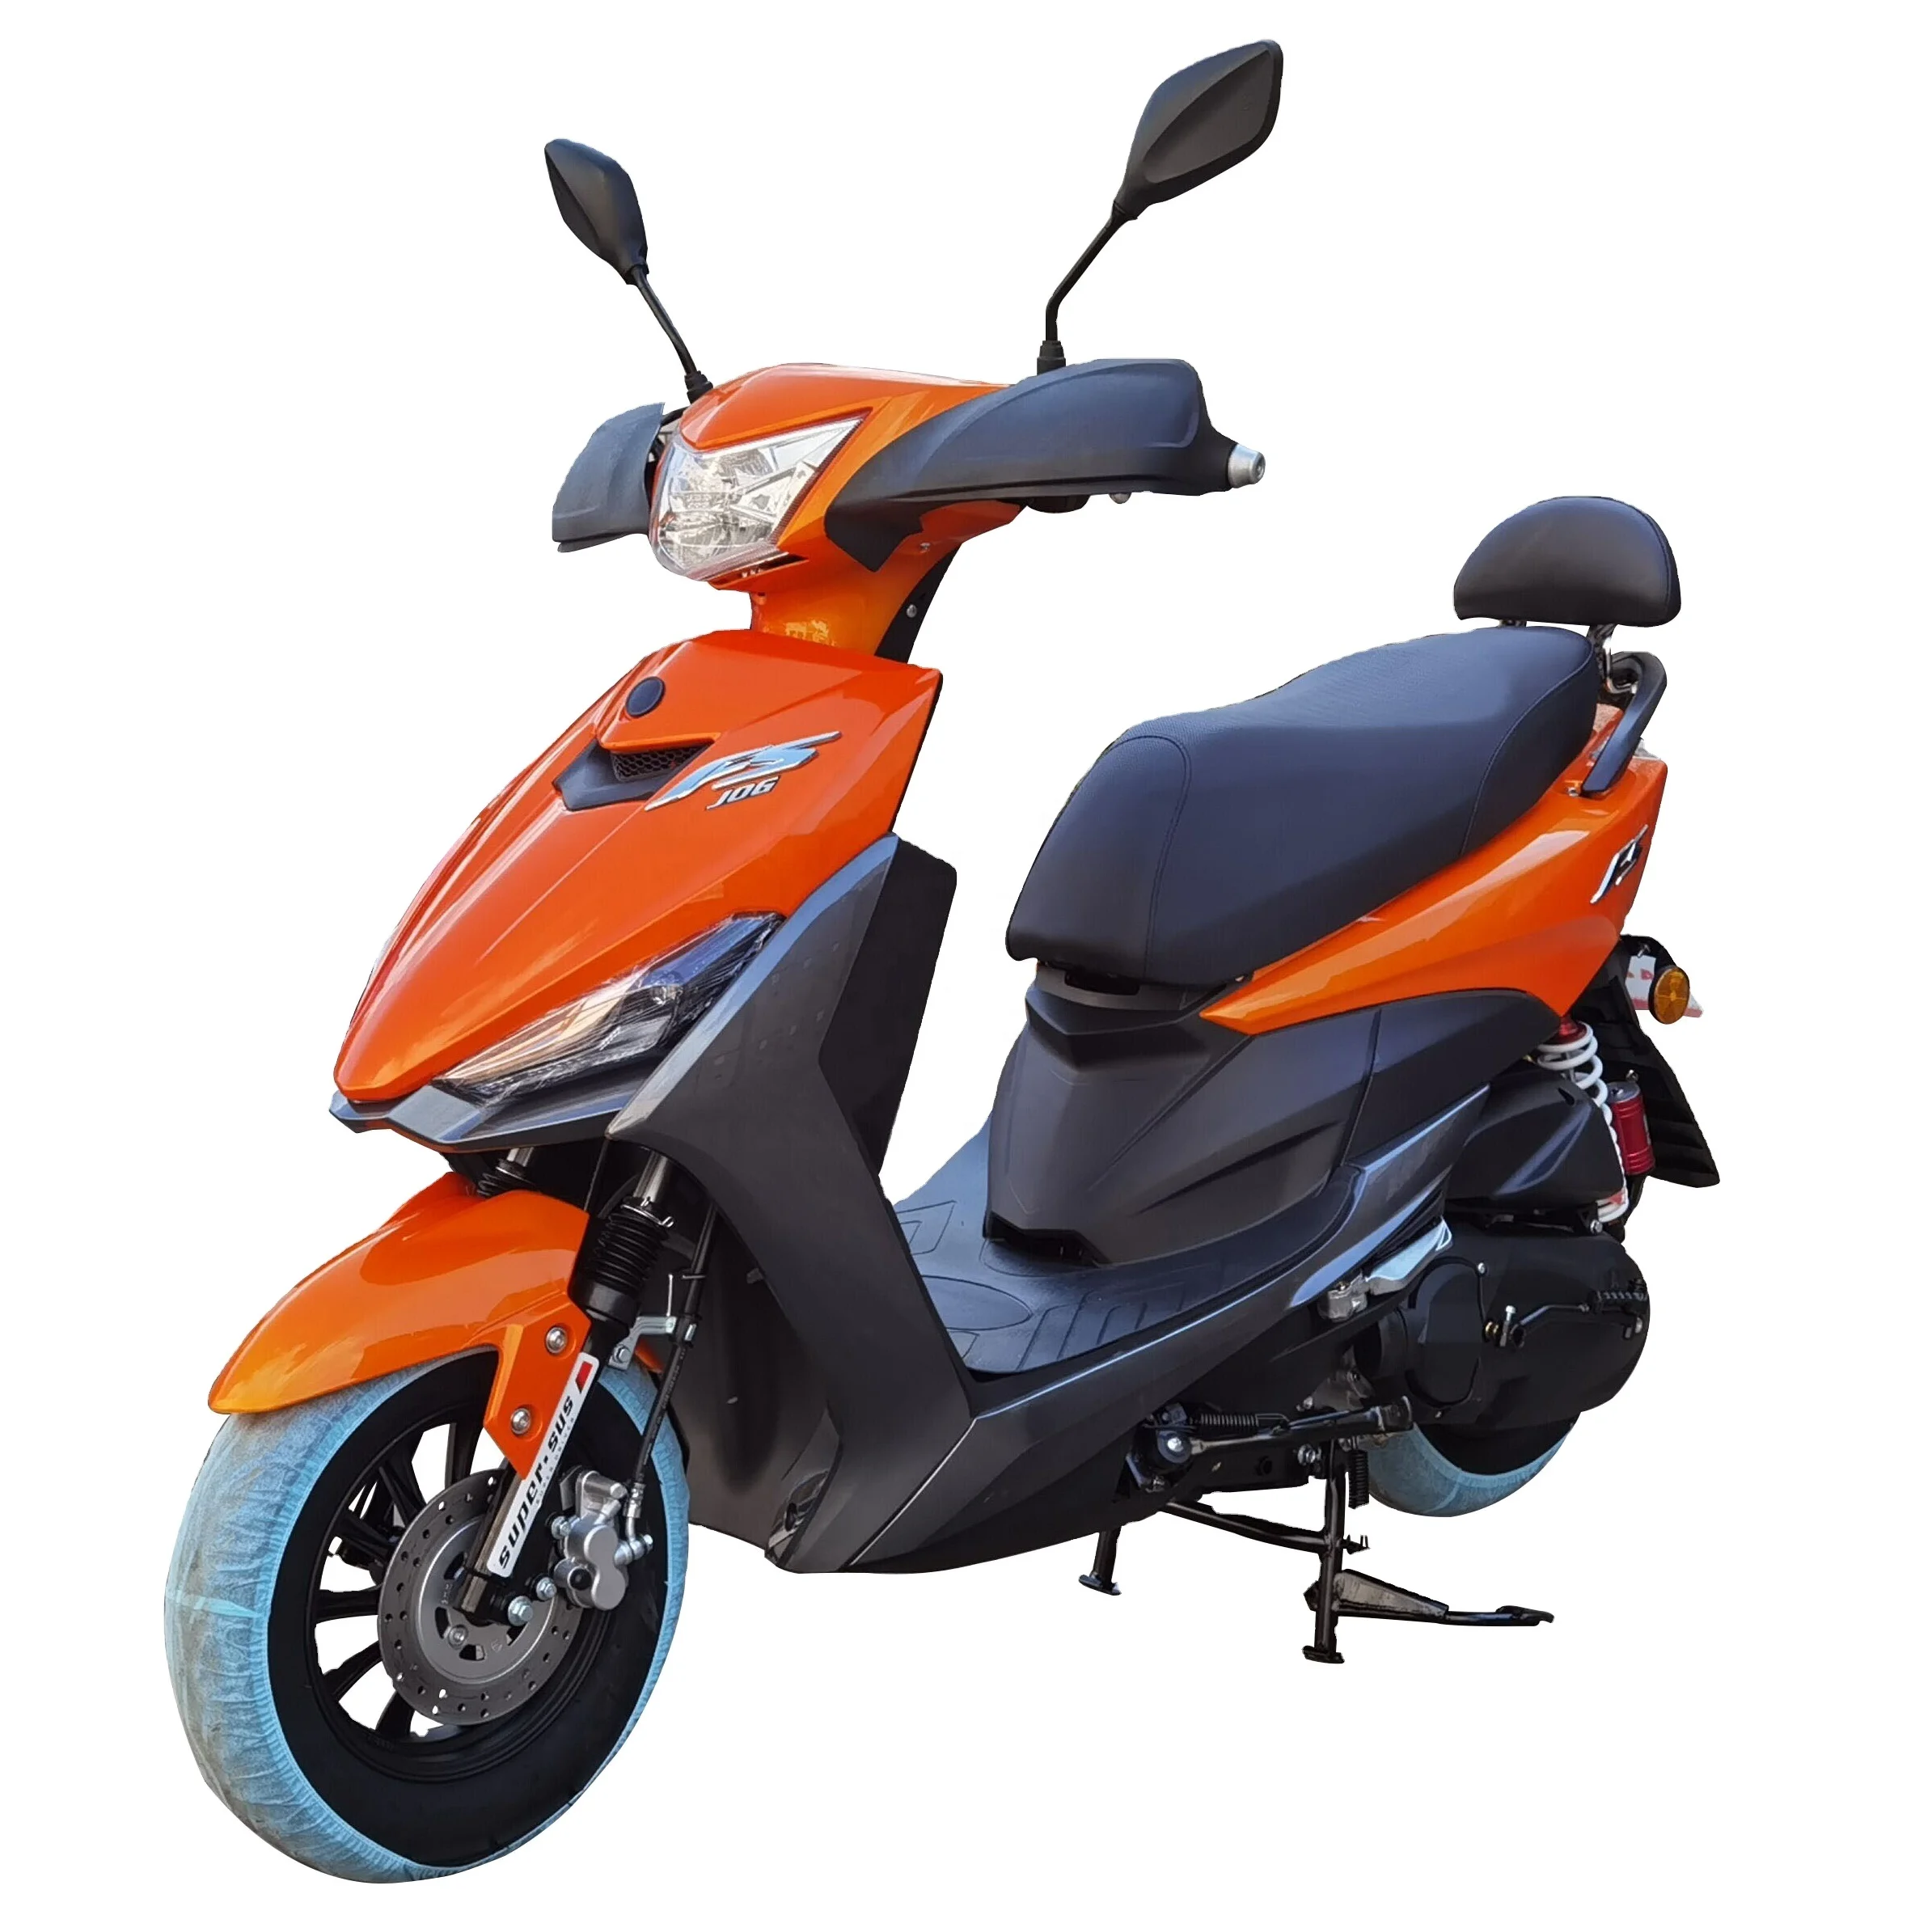 min Tips hver gang Scooter 50cc 125cc 150cc Jog Fs Sweet 125 Design Engine Racing Motorcycle  Rear Kick Start - Buy Sport Fs Scooters Efi Abs,Motorcycle High Quality  Newest,150cc Motorcycle Product on Alibaba.com